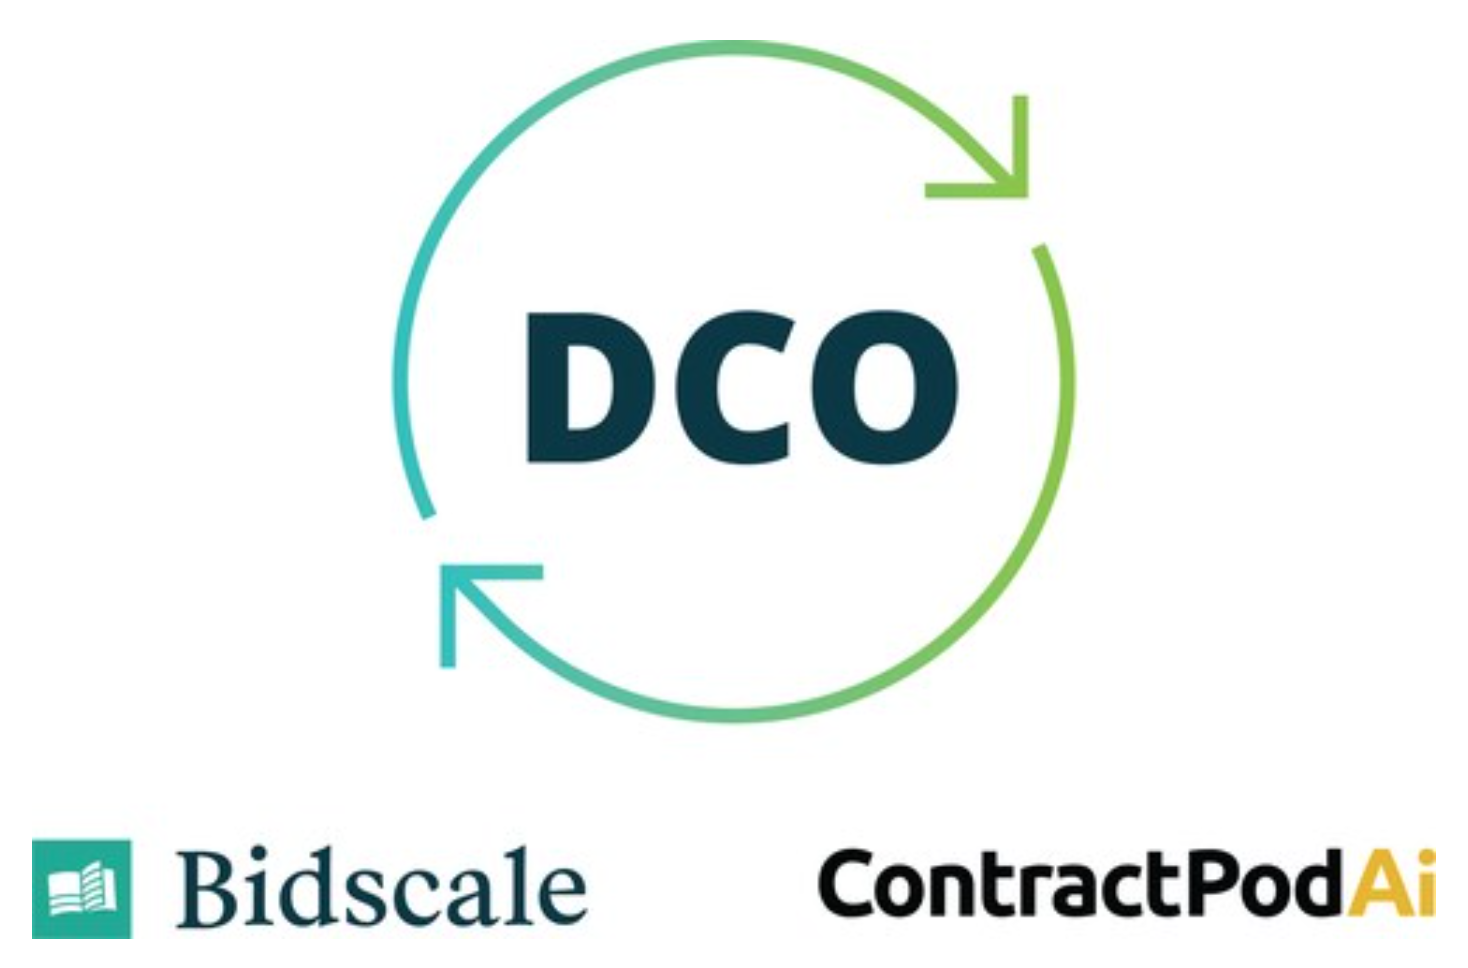 Digital Contracting Office (DCO) symbol with Bidscale and ContractPodAi logos; image courtesy of Bidscale and ContractPodAi.